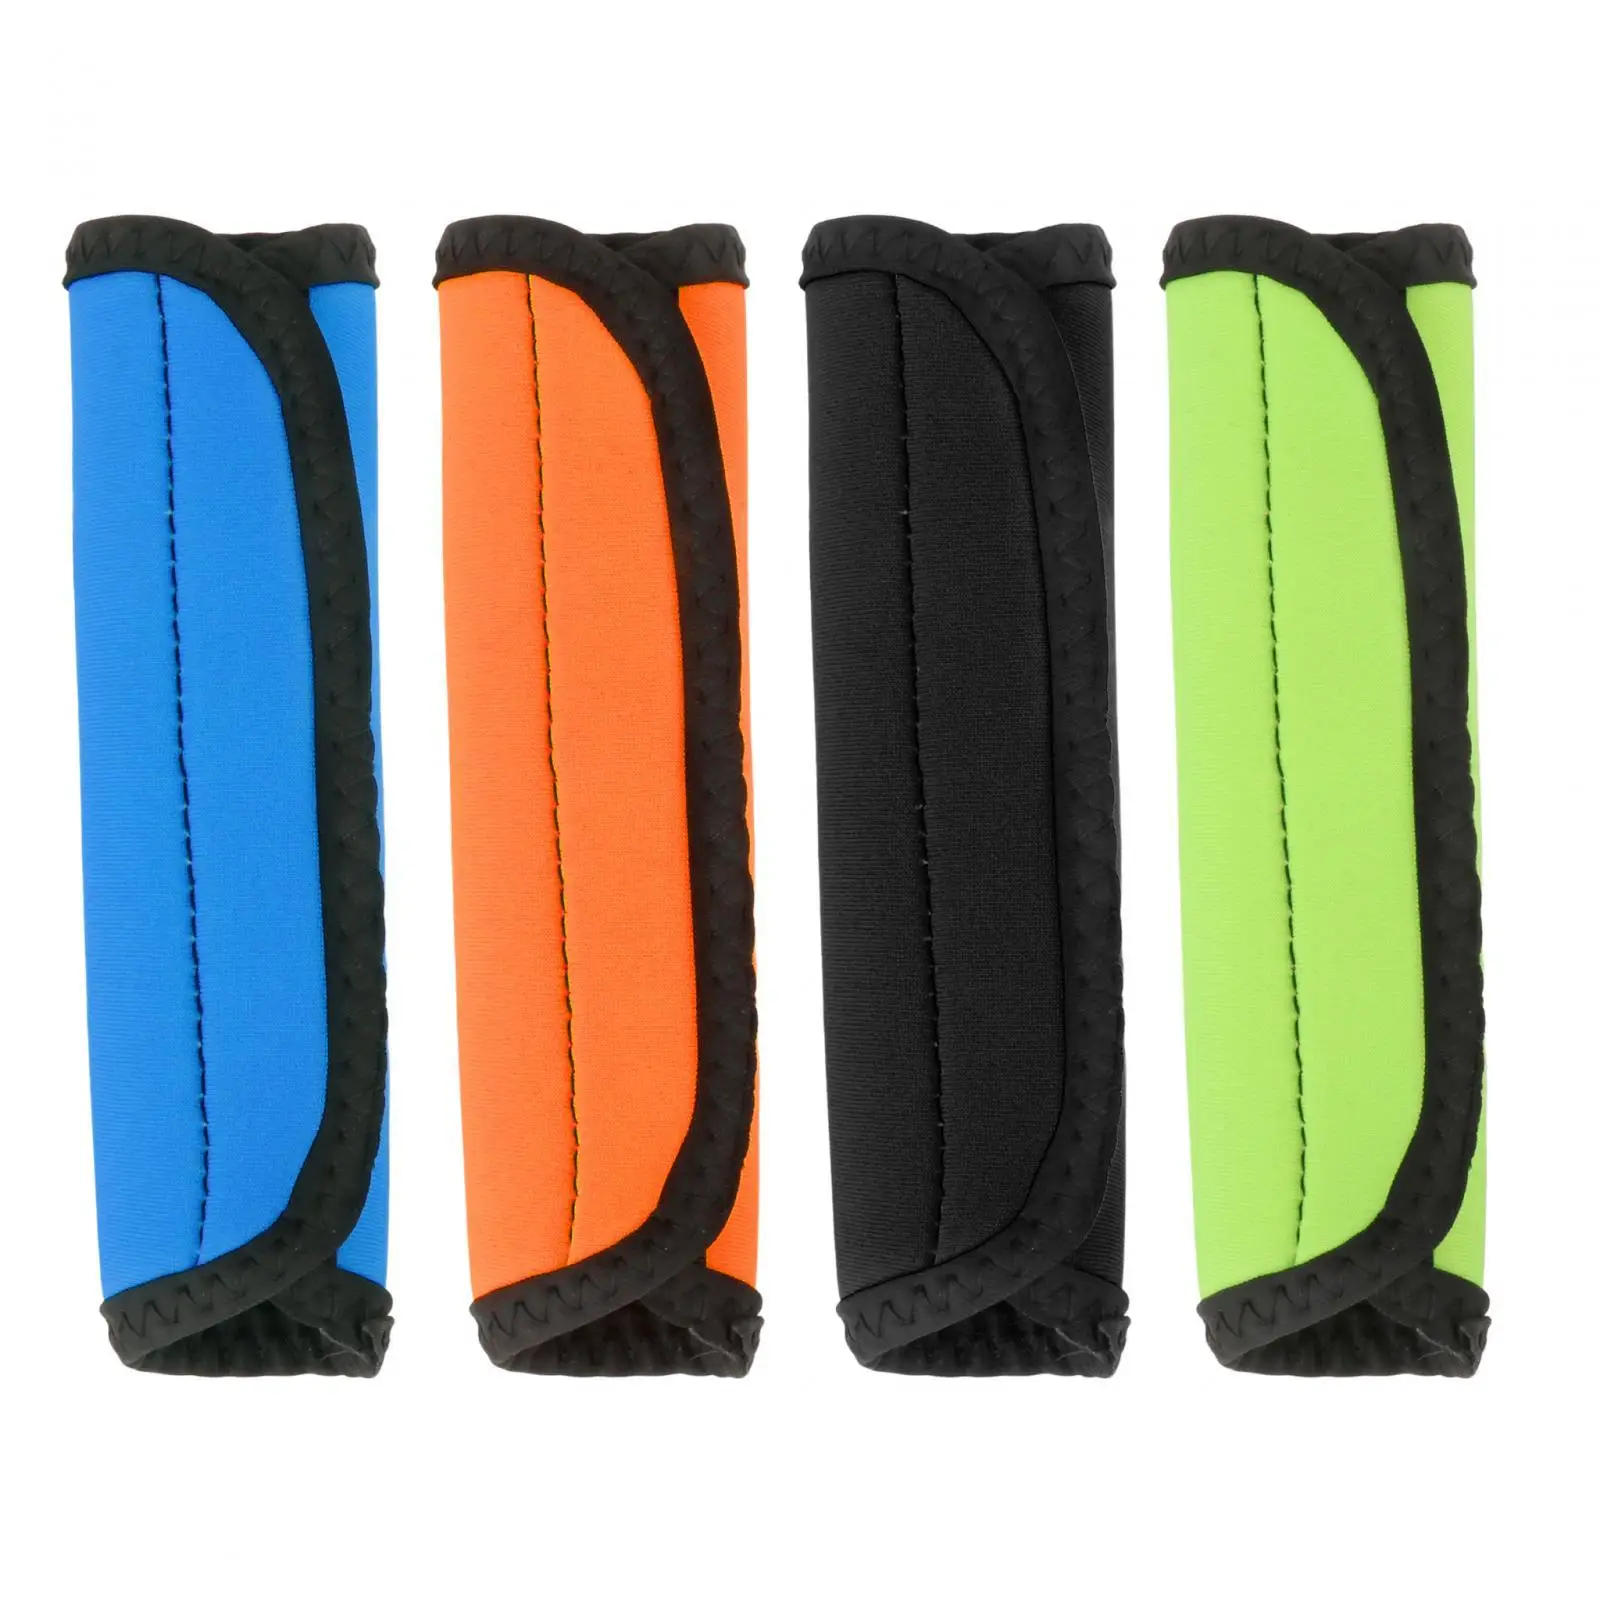 Protective Snorkel Sleeve Snorkeling Floating Sun Protection Case